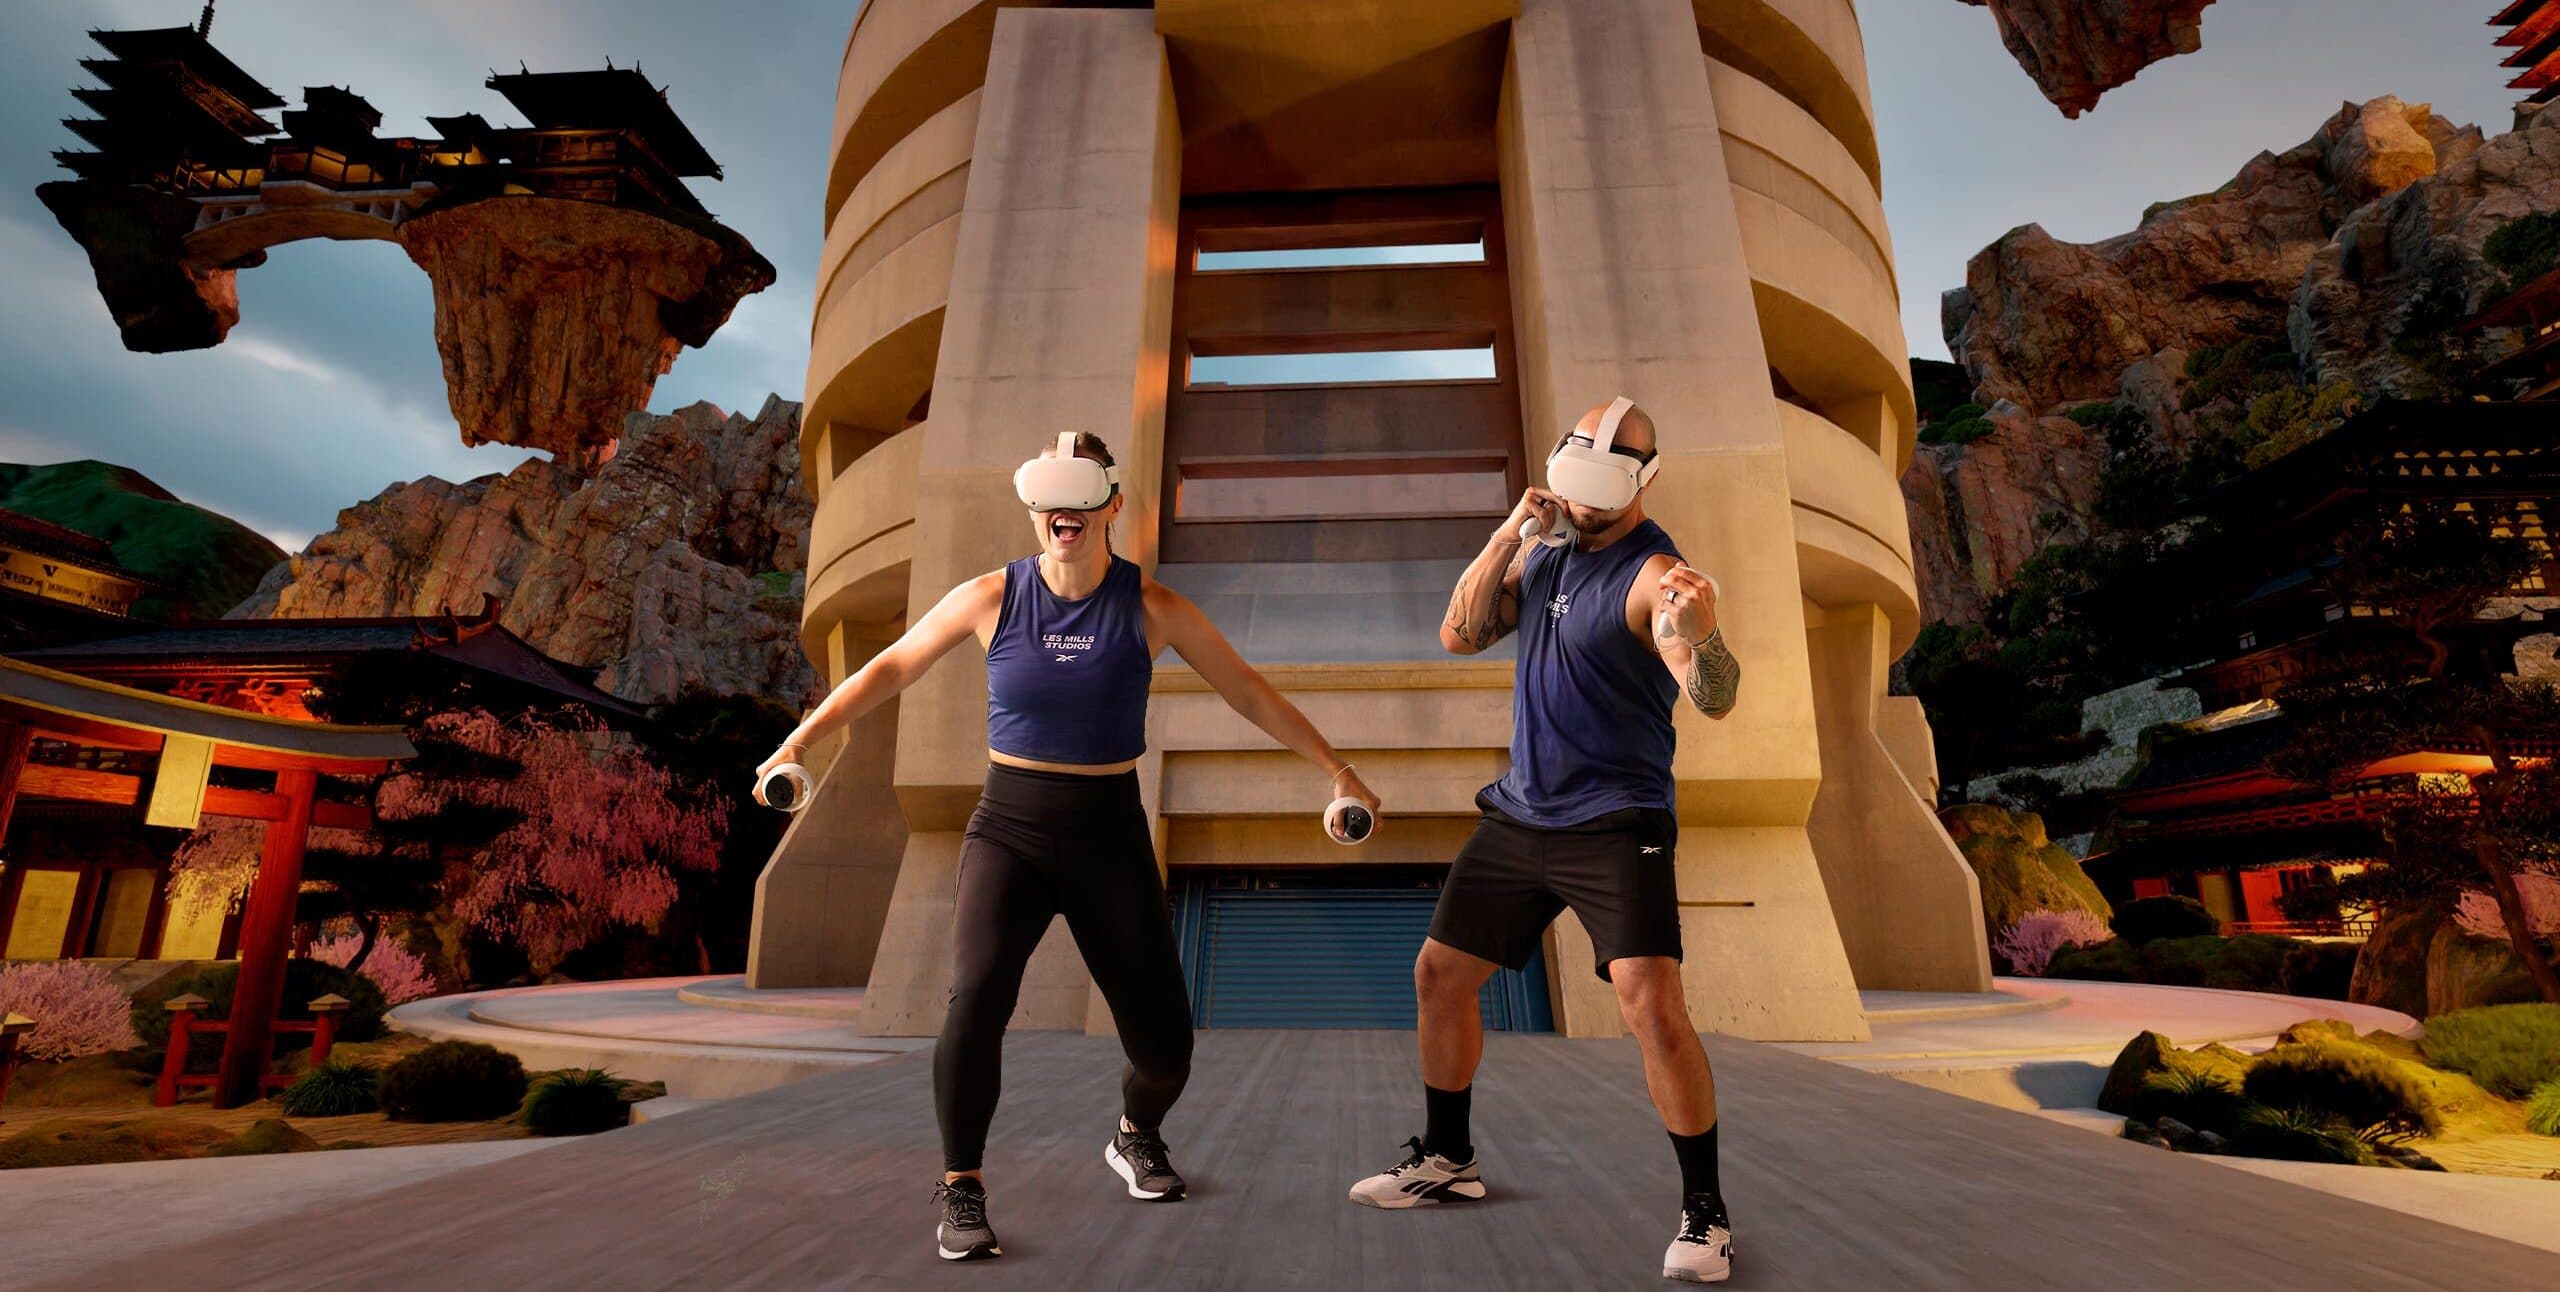 Les Mills Takes Martial Arts Into The Metaverse With BODYCOMBAT VR App